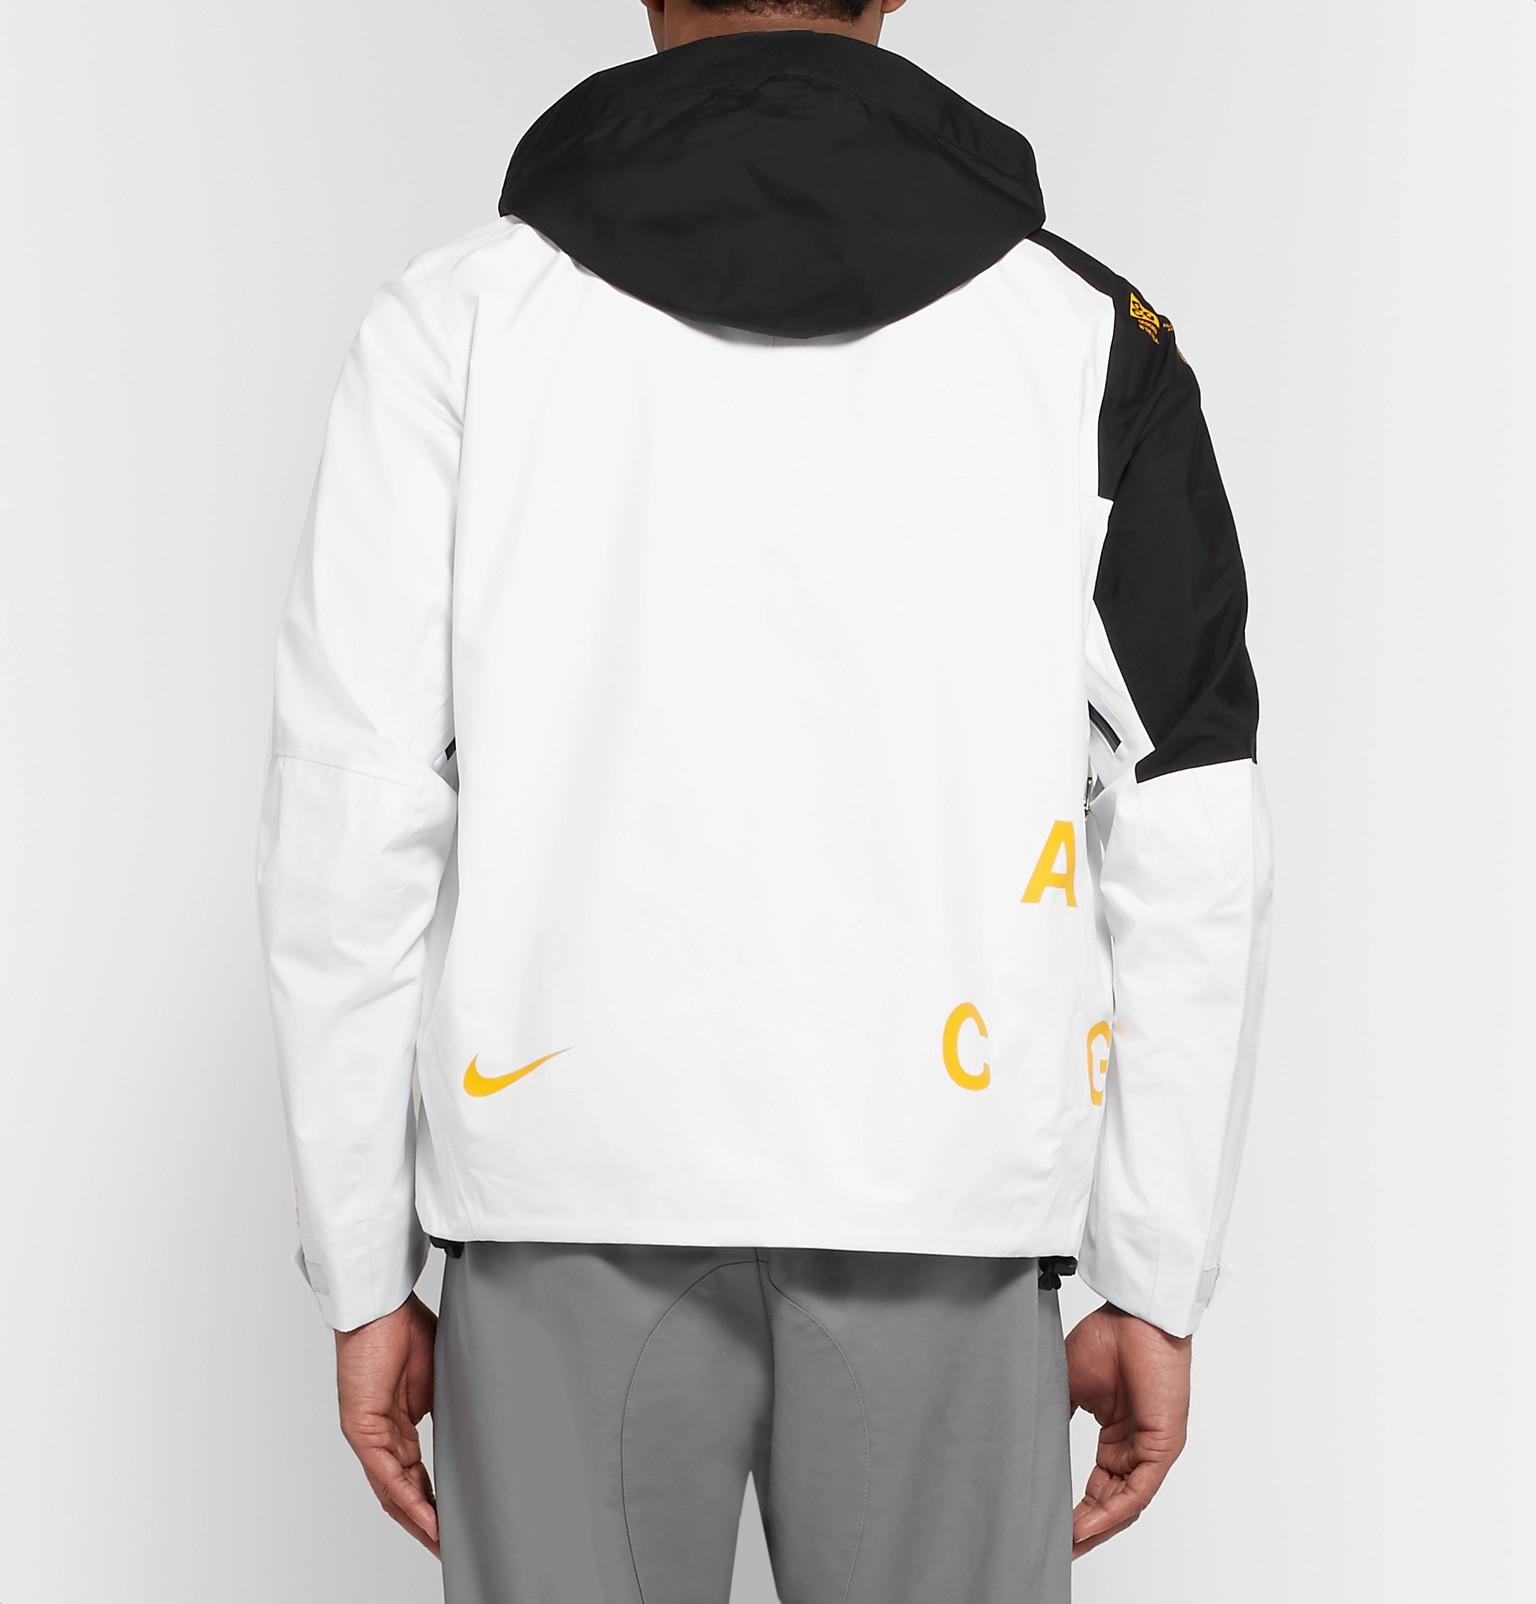 Nike Lab Acg Deploy Gore-tex Jacket in White for Men - Lyst